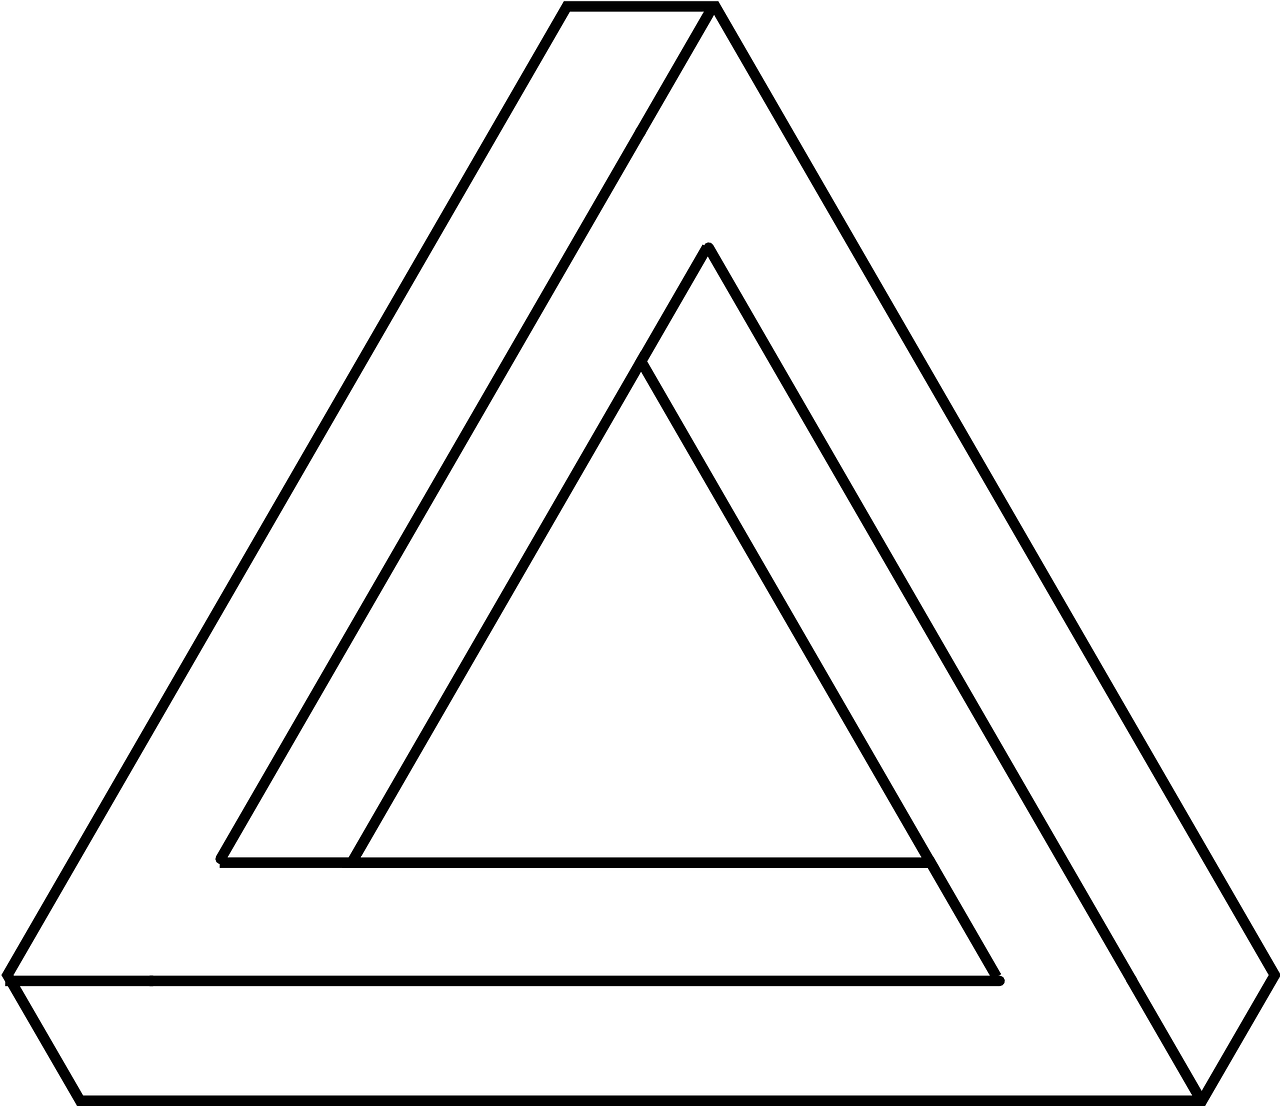 Download Penrose Triangle Illusion.png | Wallpapers.com